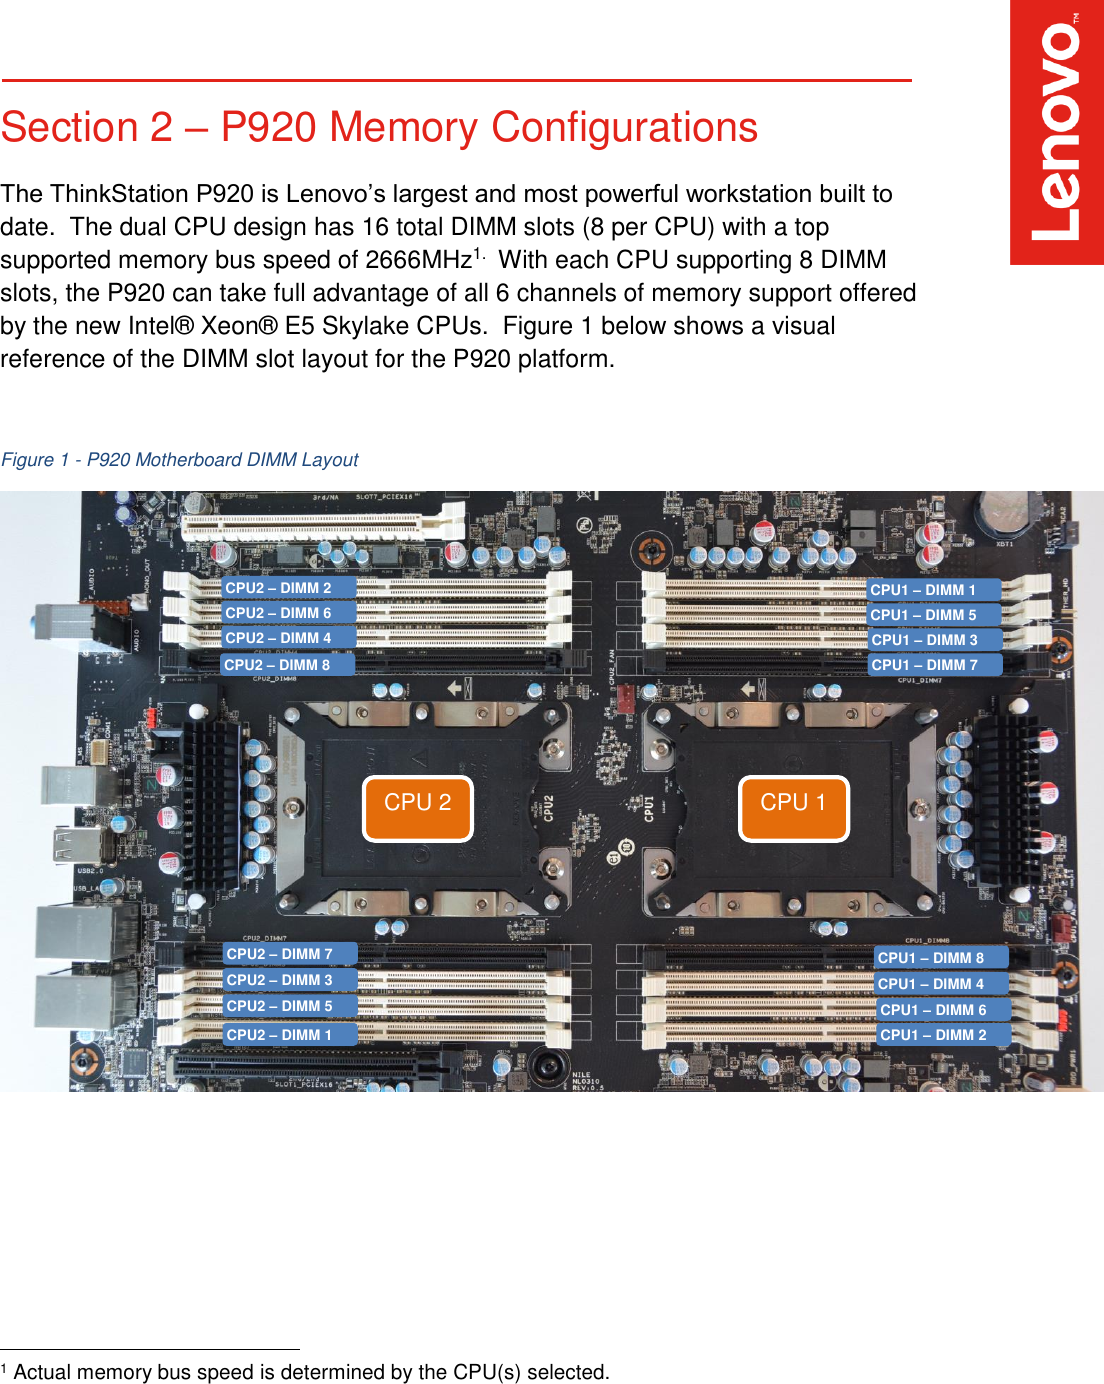 Page 4 of 9 - Lenovo Thinkstation P920 P720 Memory Configurations V1.0 User Manual - Think Station P720, Workstation (Think Station) Type 30BC